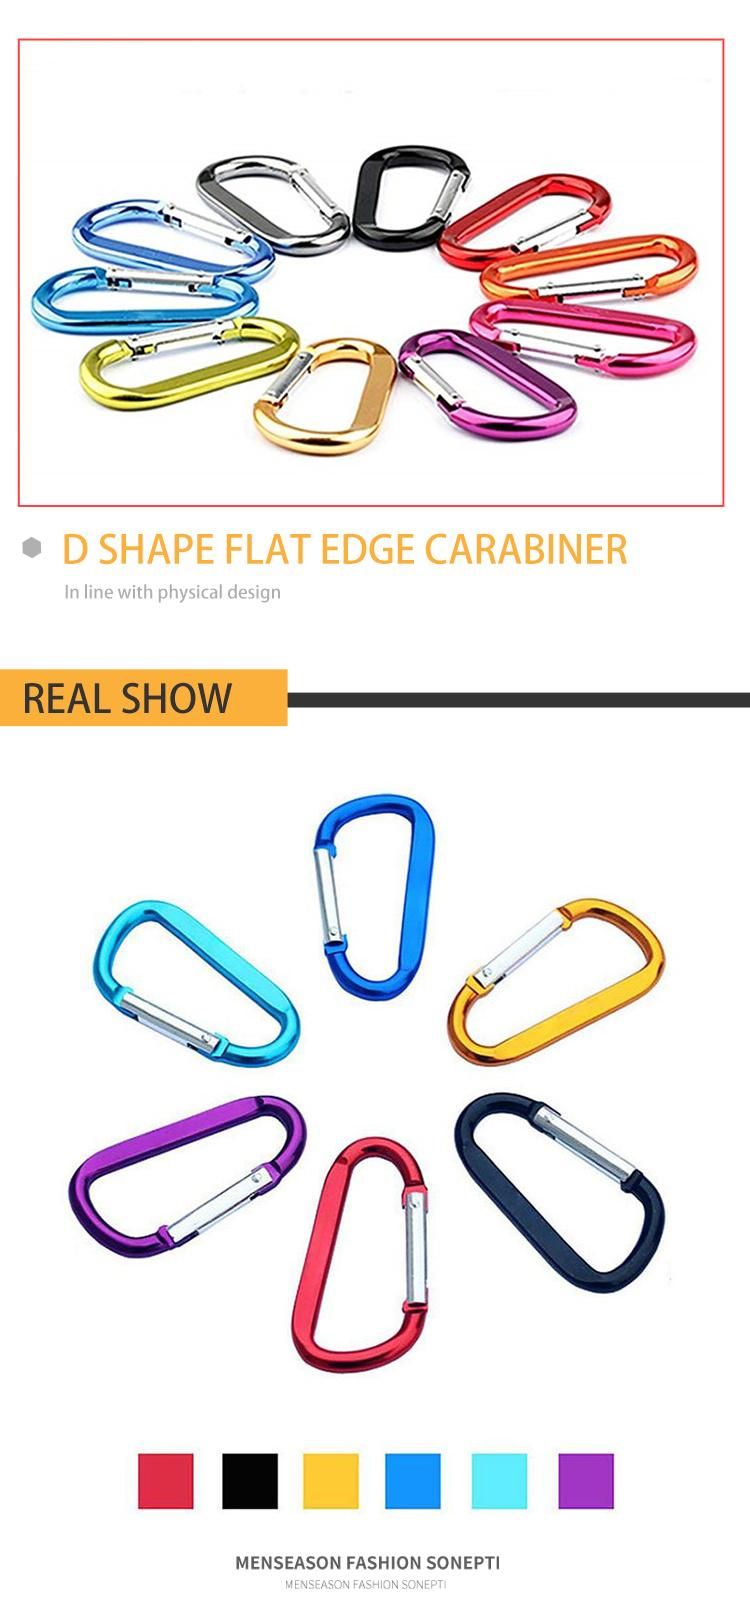 Metal Carabiner Used to Hanger Bottle and Easy to Assembeld